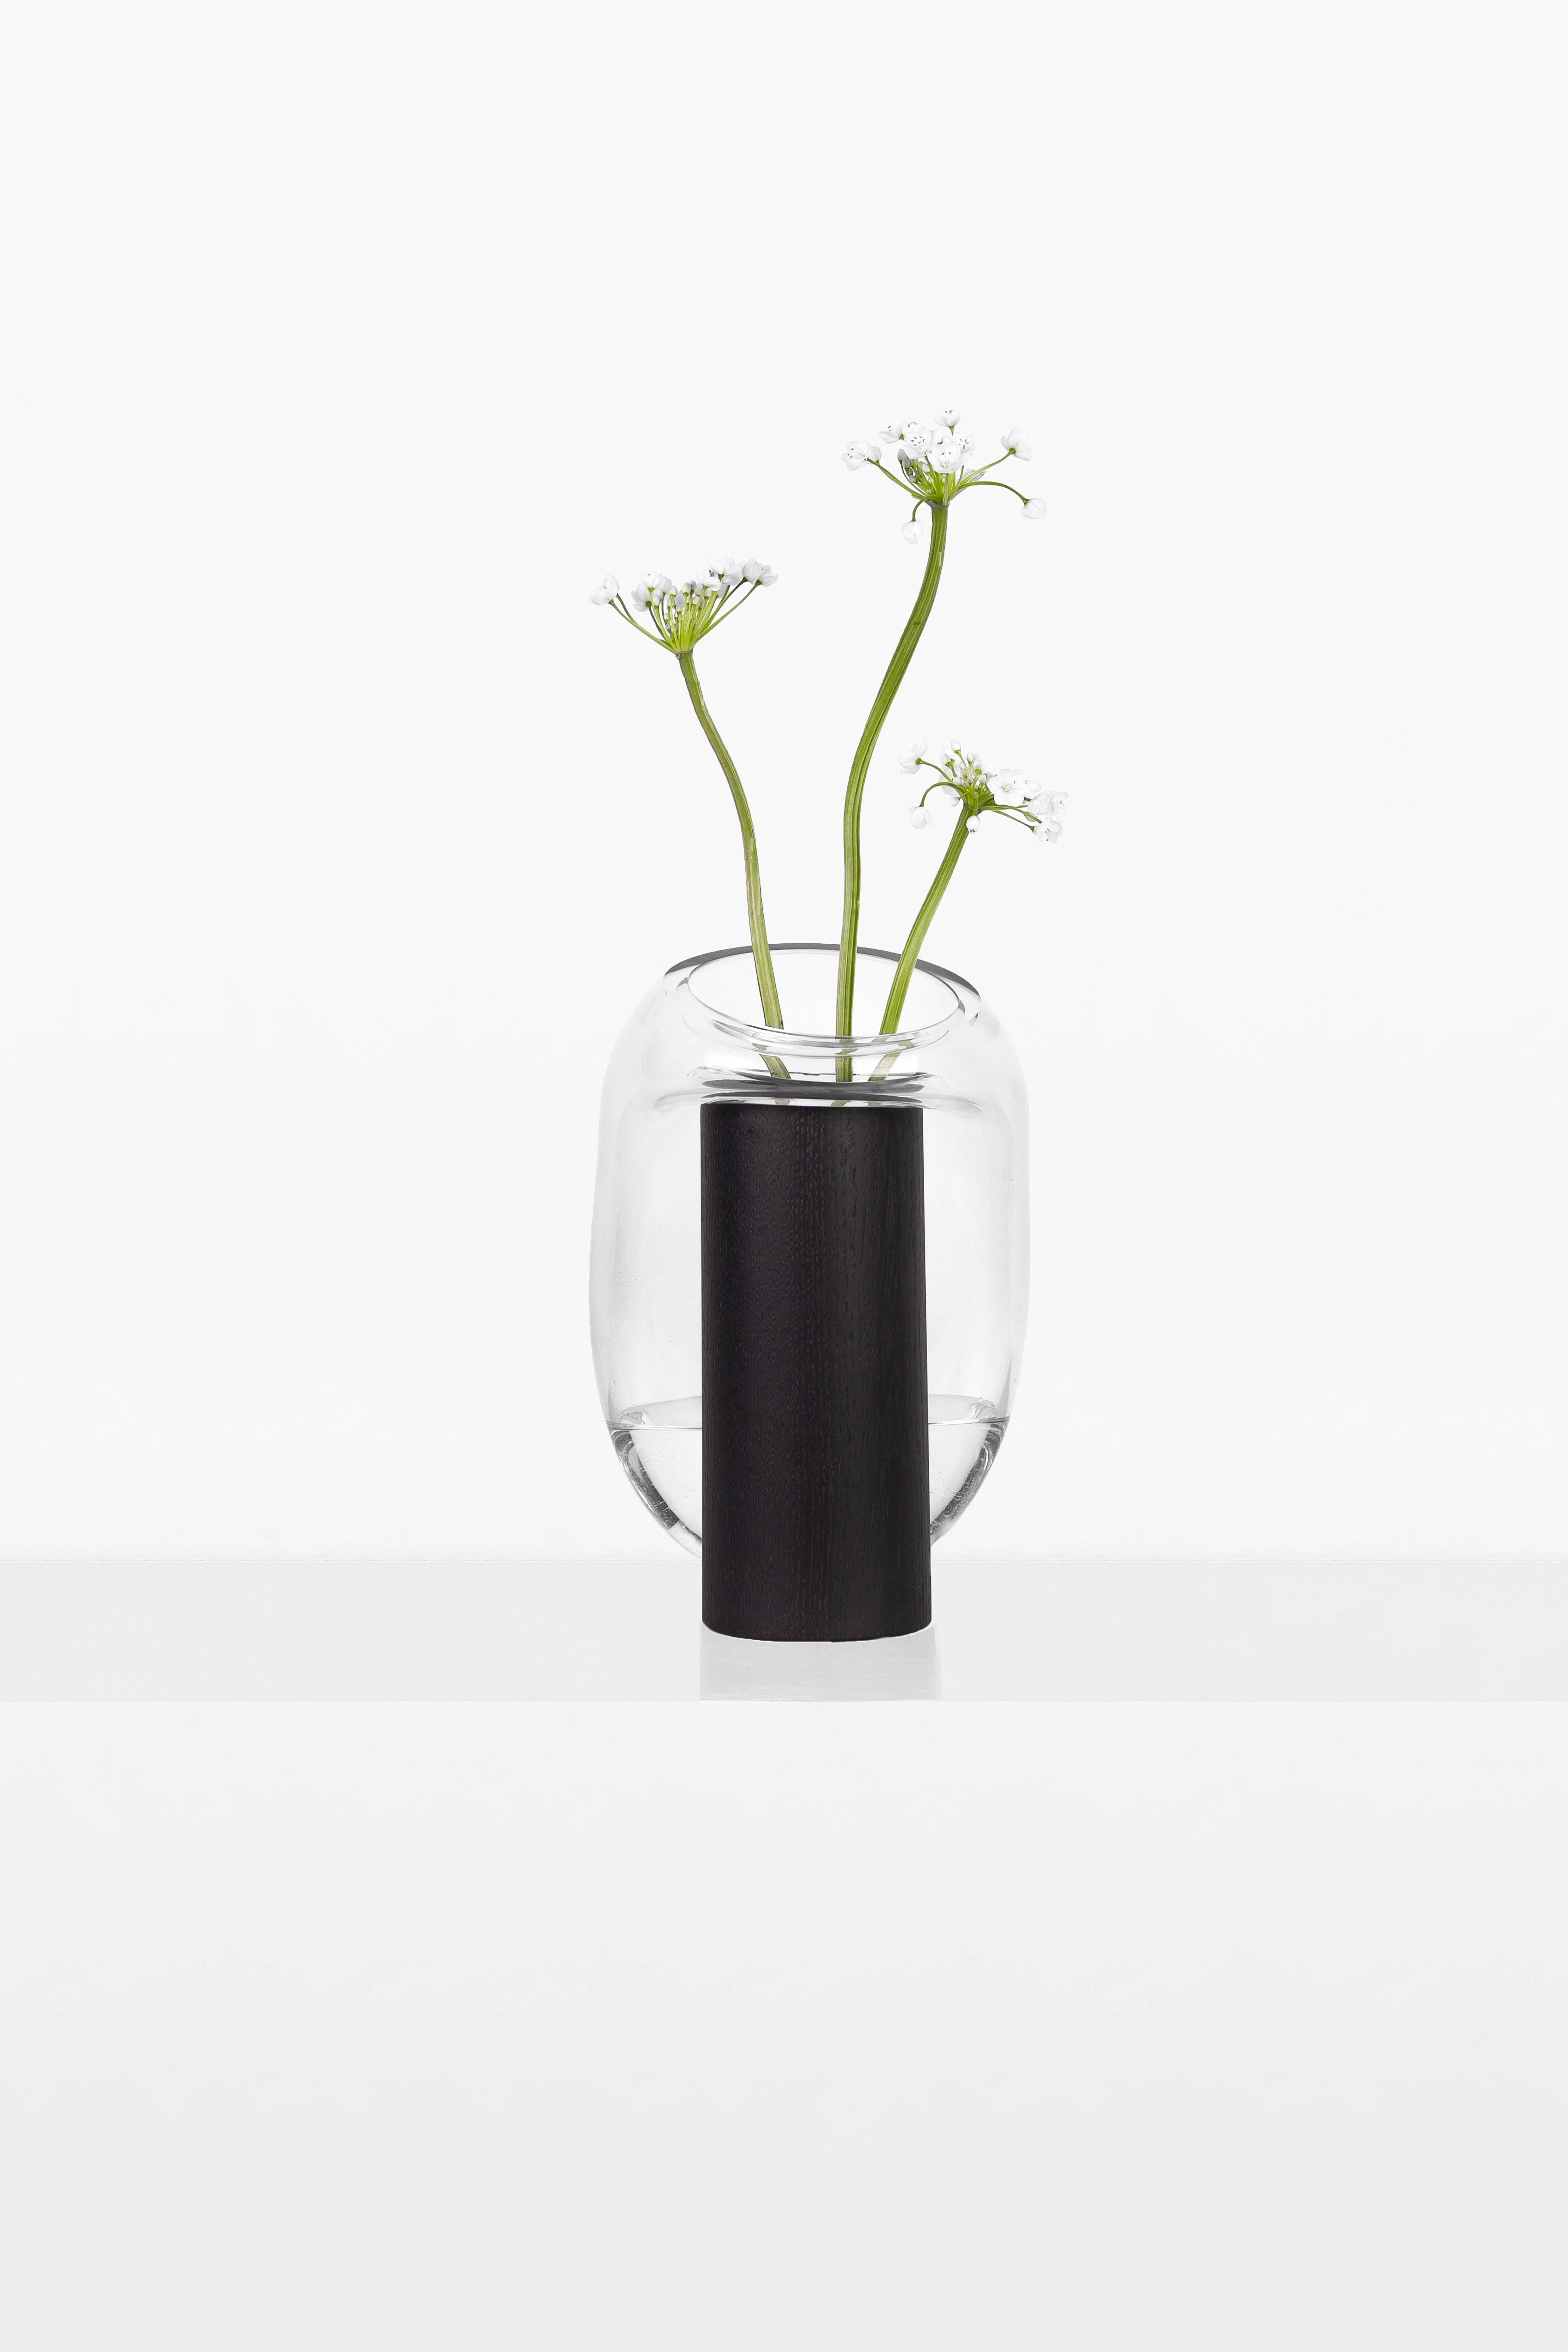 Modern Gutta Boon Vase CS1 by Noom in Blown Transparent Glass and Oak Base 8